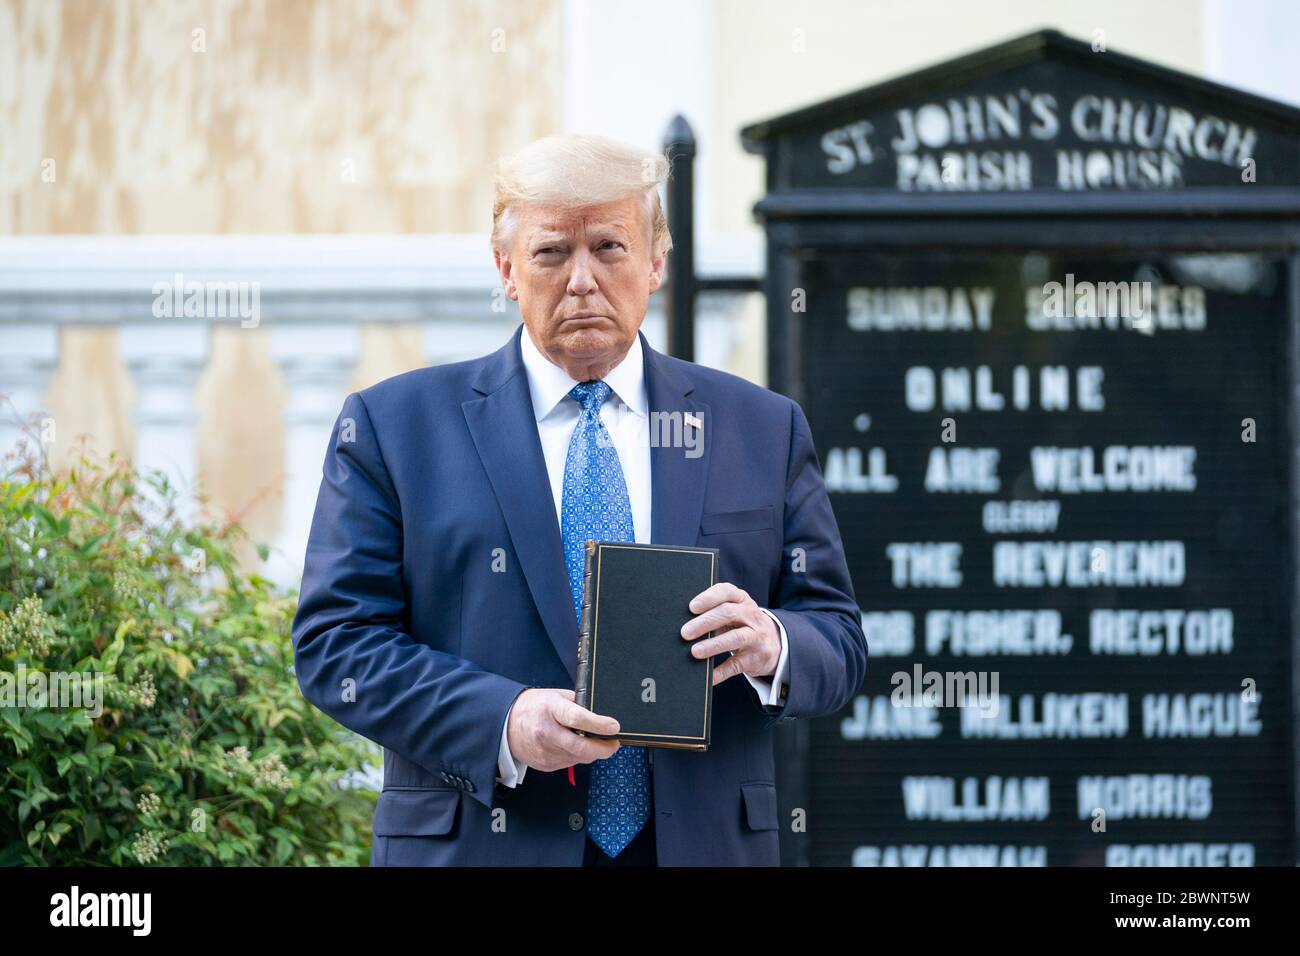 Washington, United States Of America. 01st June, 2020. Washington, United States of America. 01 June, 2020. U.S. President Donald Trump poses with a bible in front of the St Johns Episcopal Church damaged in riots following the killing of an unarmed black man in Minneapolis June 1, 2020 in Washington, DC Trump had the area cleared by police using tear gas on peaceful protesters for the photo op. Credit: Shealah Craighead/White House Photo/Alamy Live News Stock Photo